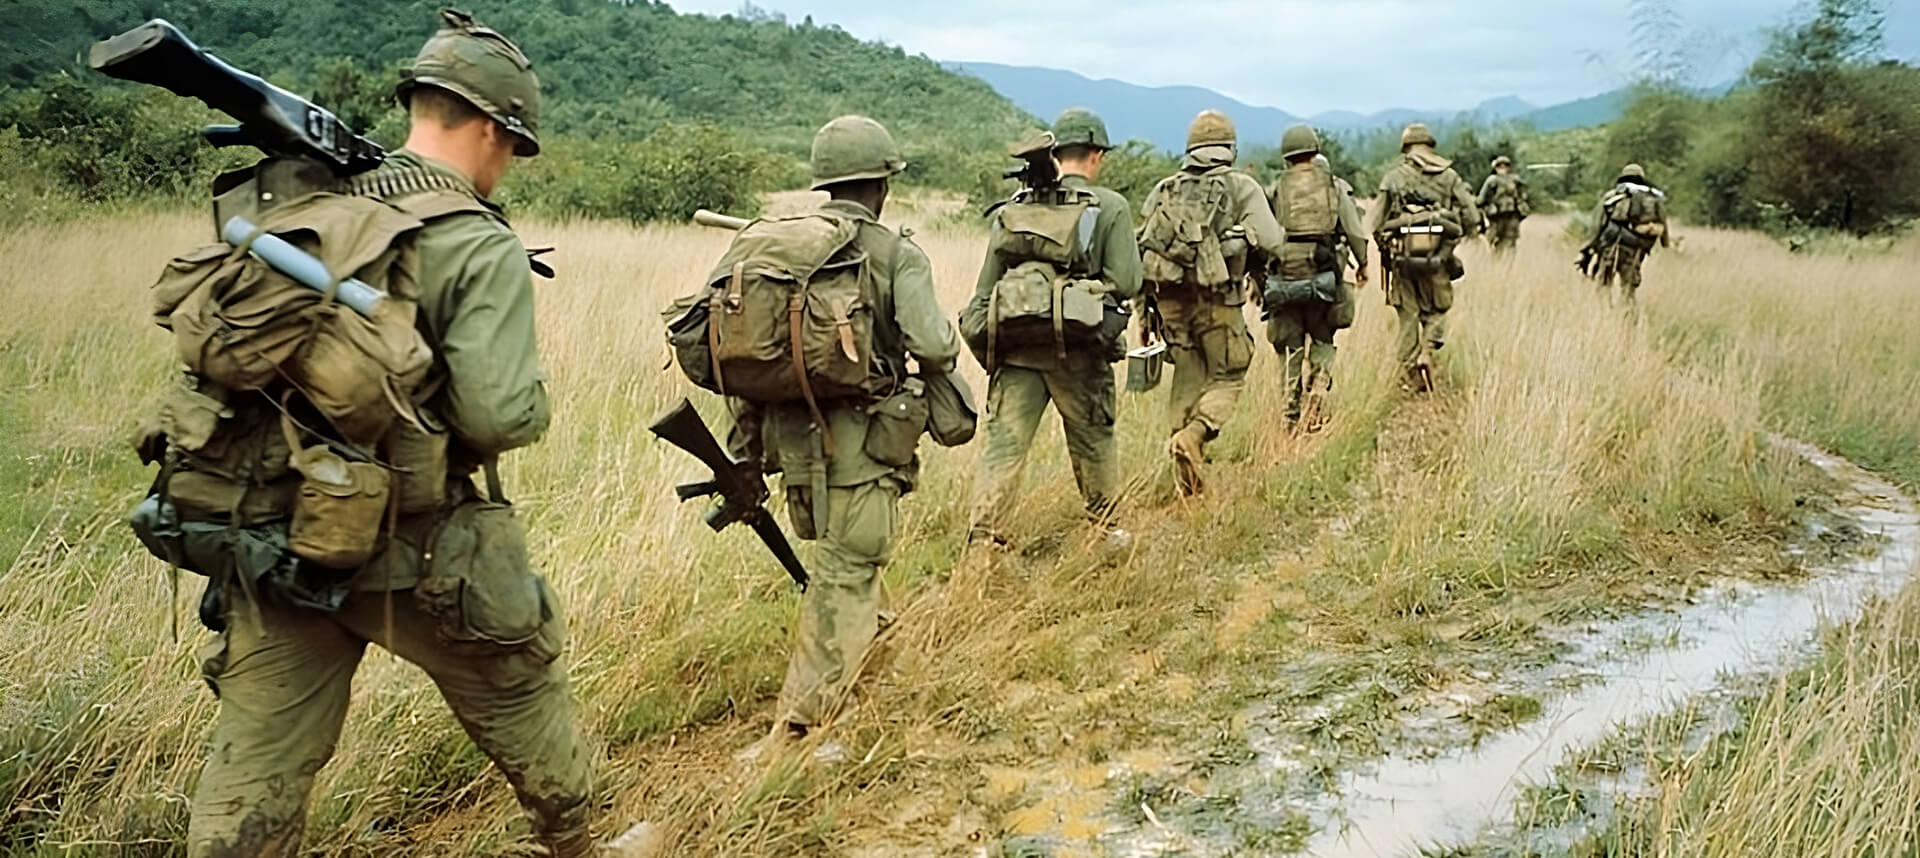 How military uniforms evolved for jungle warfare